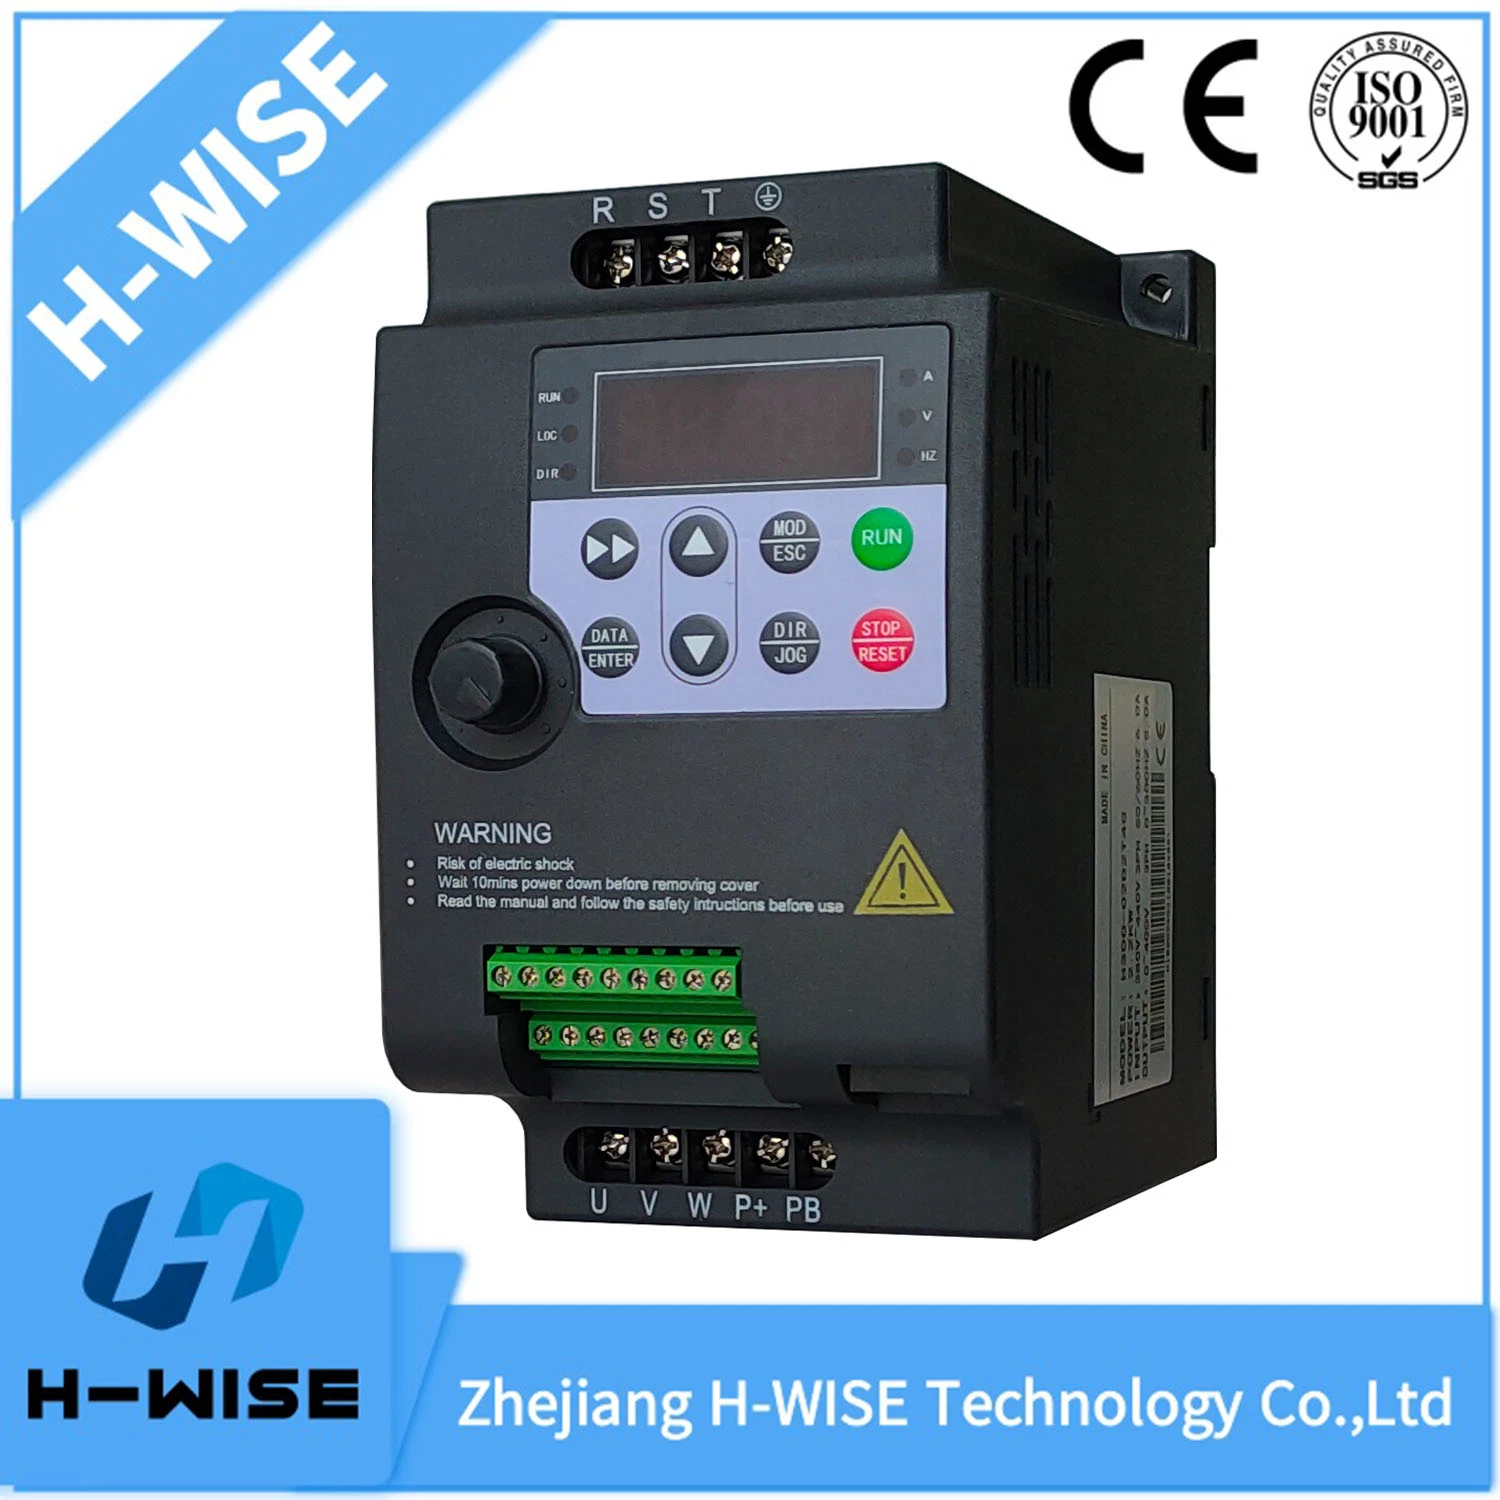 Micro Economical Variable Frequency Drive Power 2.2kw 3HP, 220V Single Phase Frequency Drive Inverter/AC Drive/Speed Controller Converter/VFD